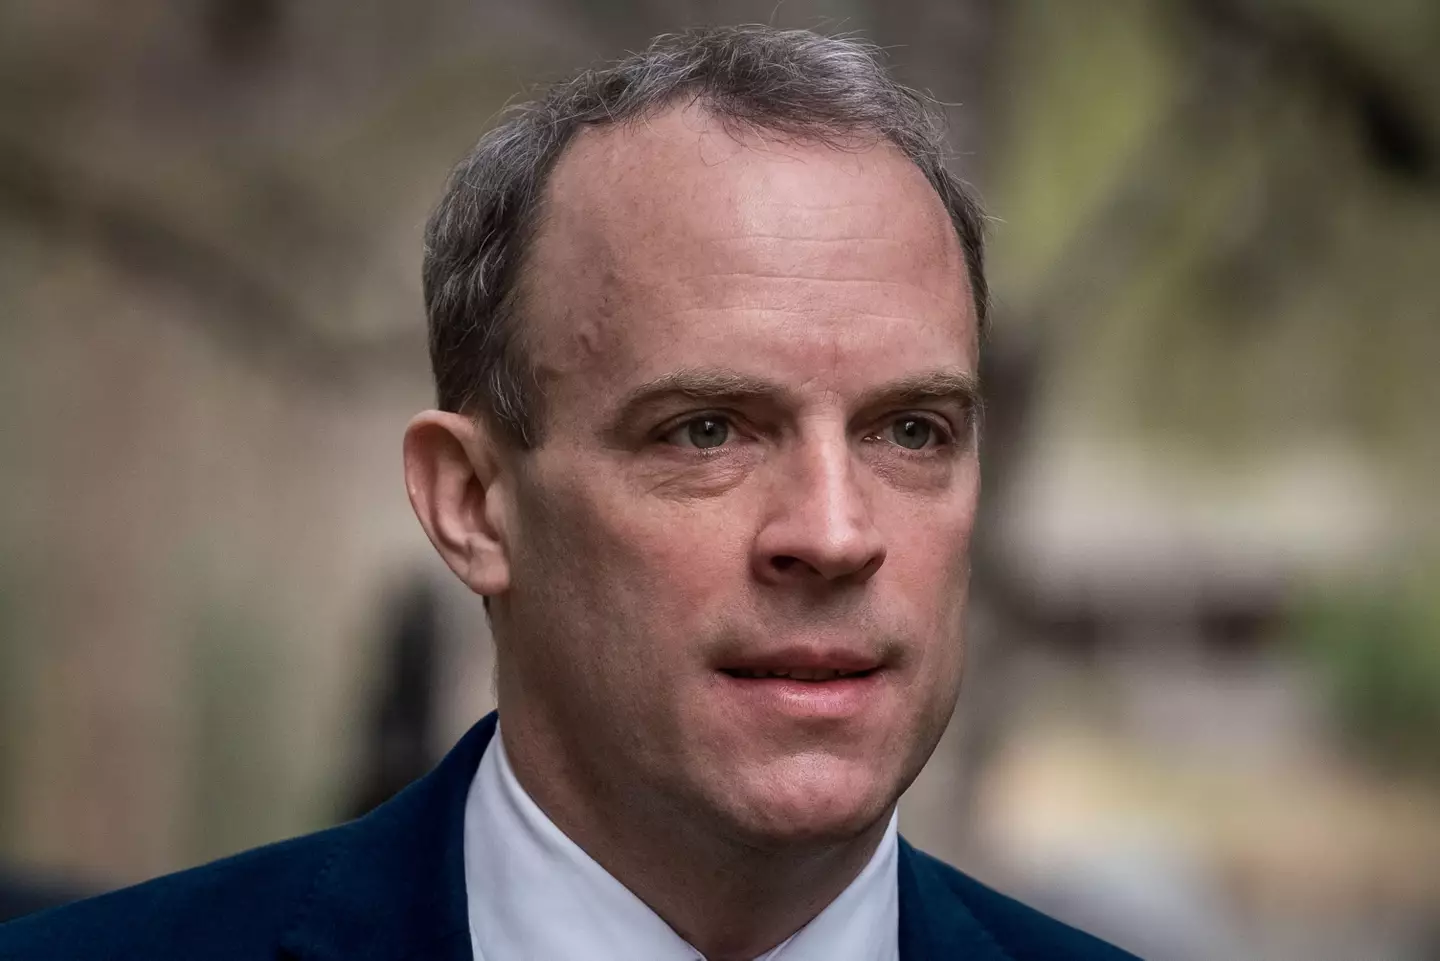 Dominic Raab made the rule changes to parole hearings.